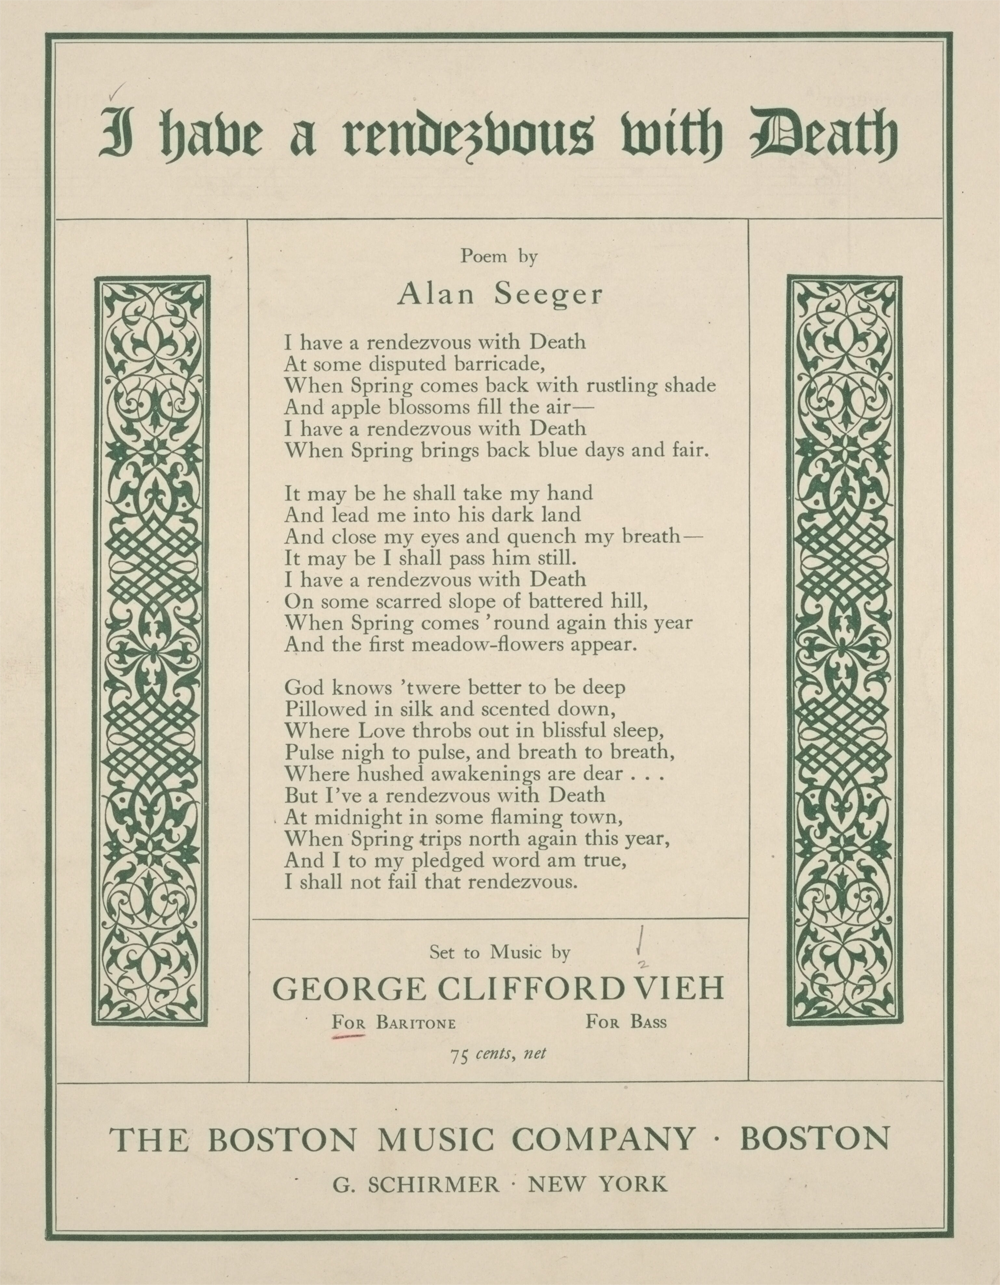 Sheet music for "I Have a Rendezvous with Death,"  George Clifford Vieh, Alan Seeger, 1918. (Library of Congress)